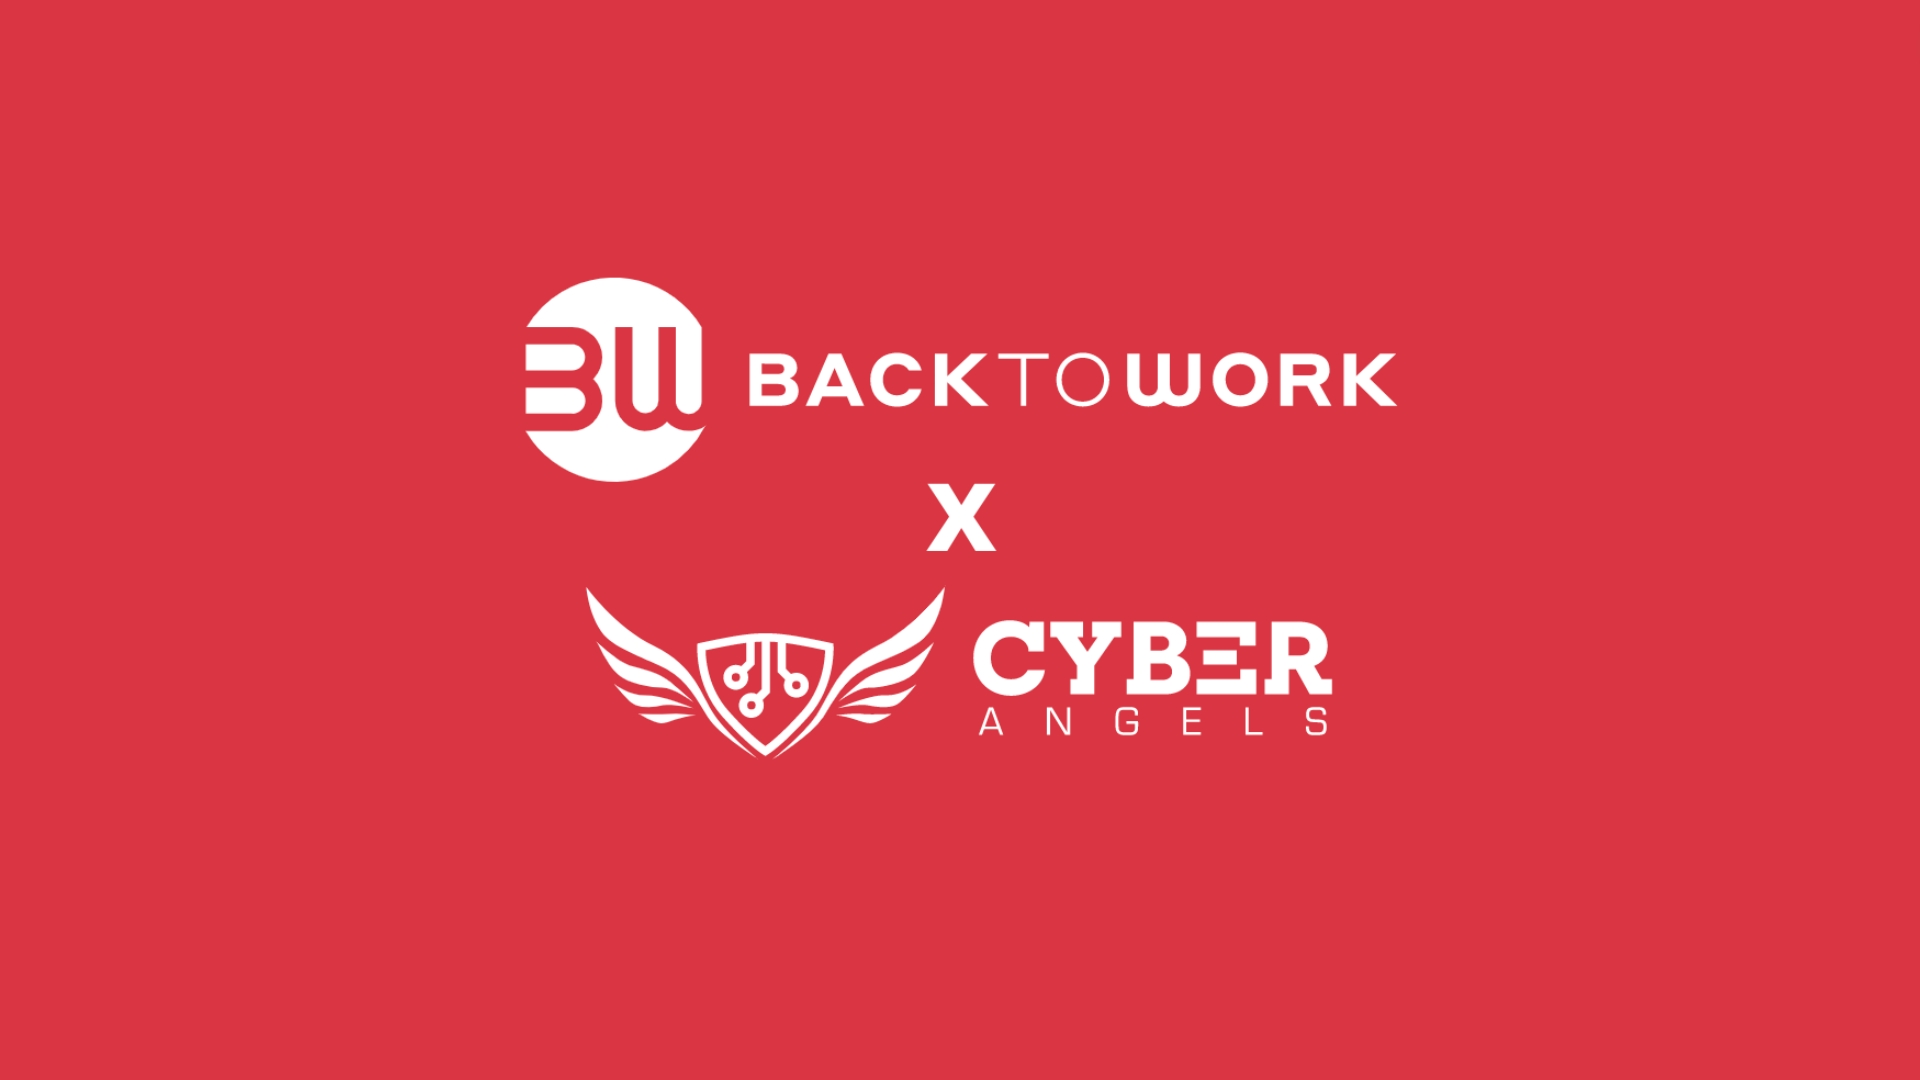 Cybersecurity and investment: Cyberangels and Backtowork's collaboration for informed investors